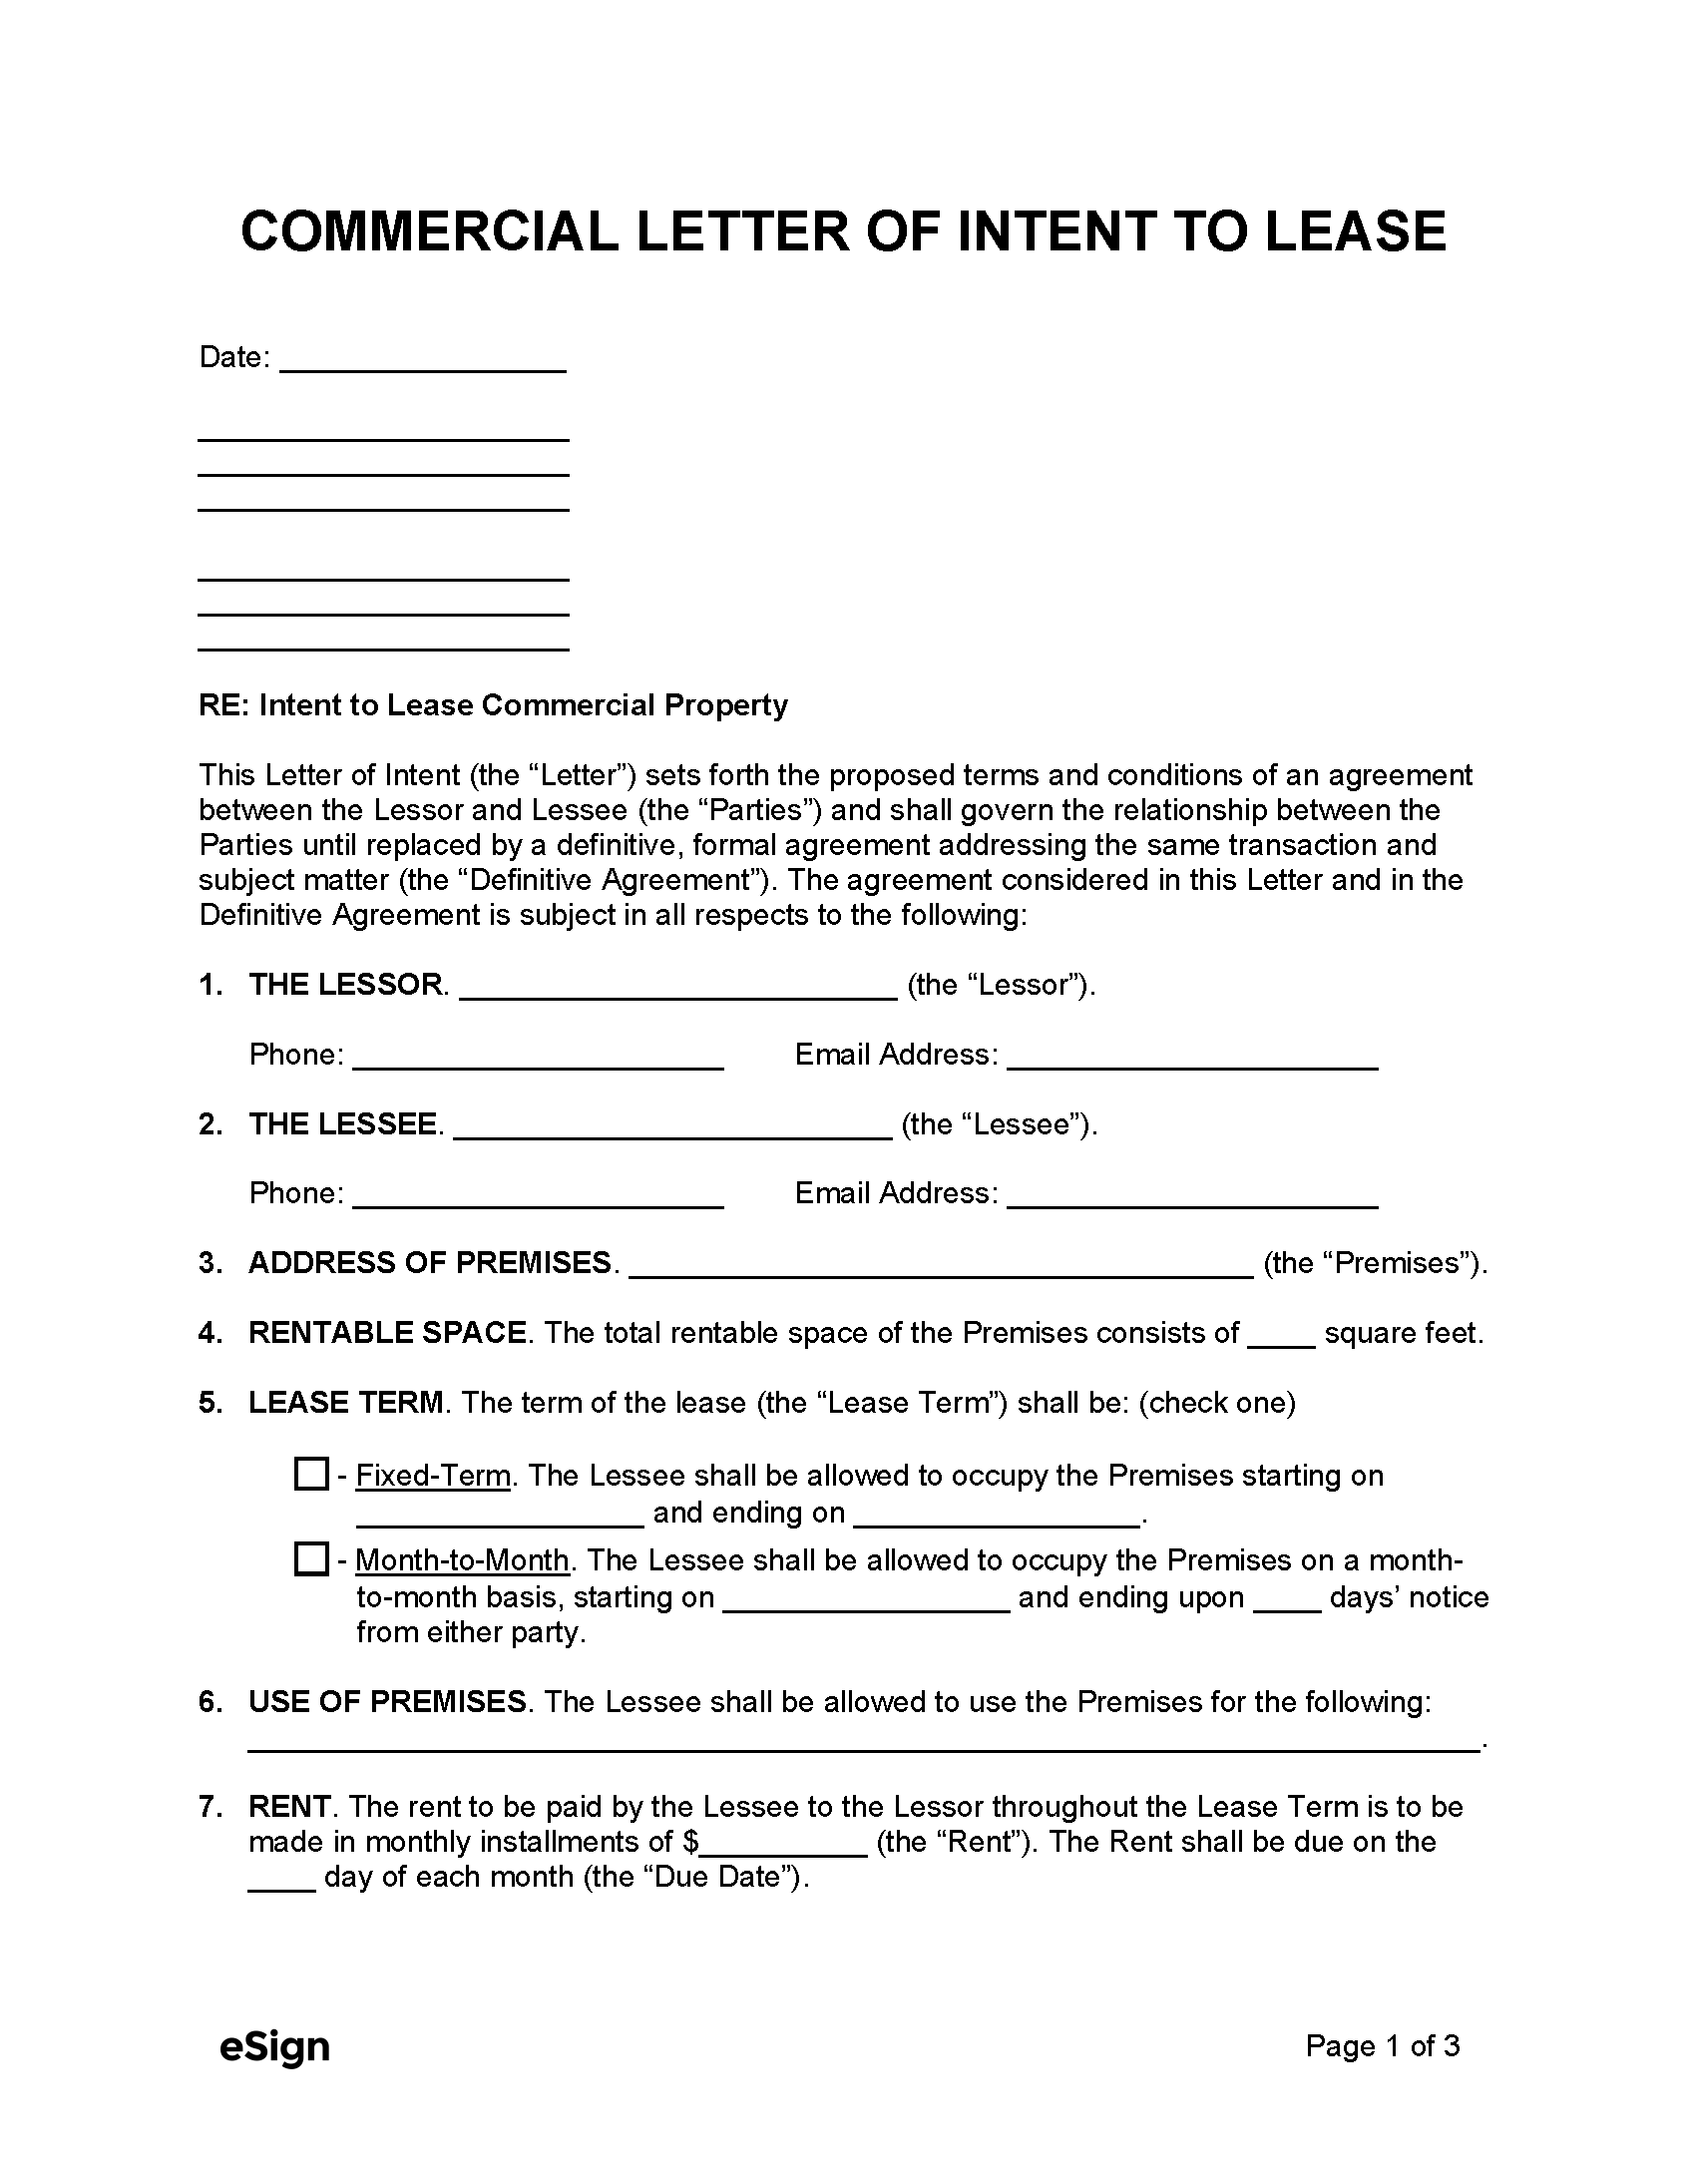 free-commercial-letter-of-intent-to-lease-pdf-word